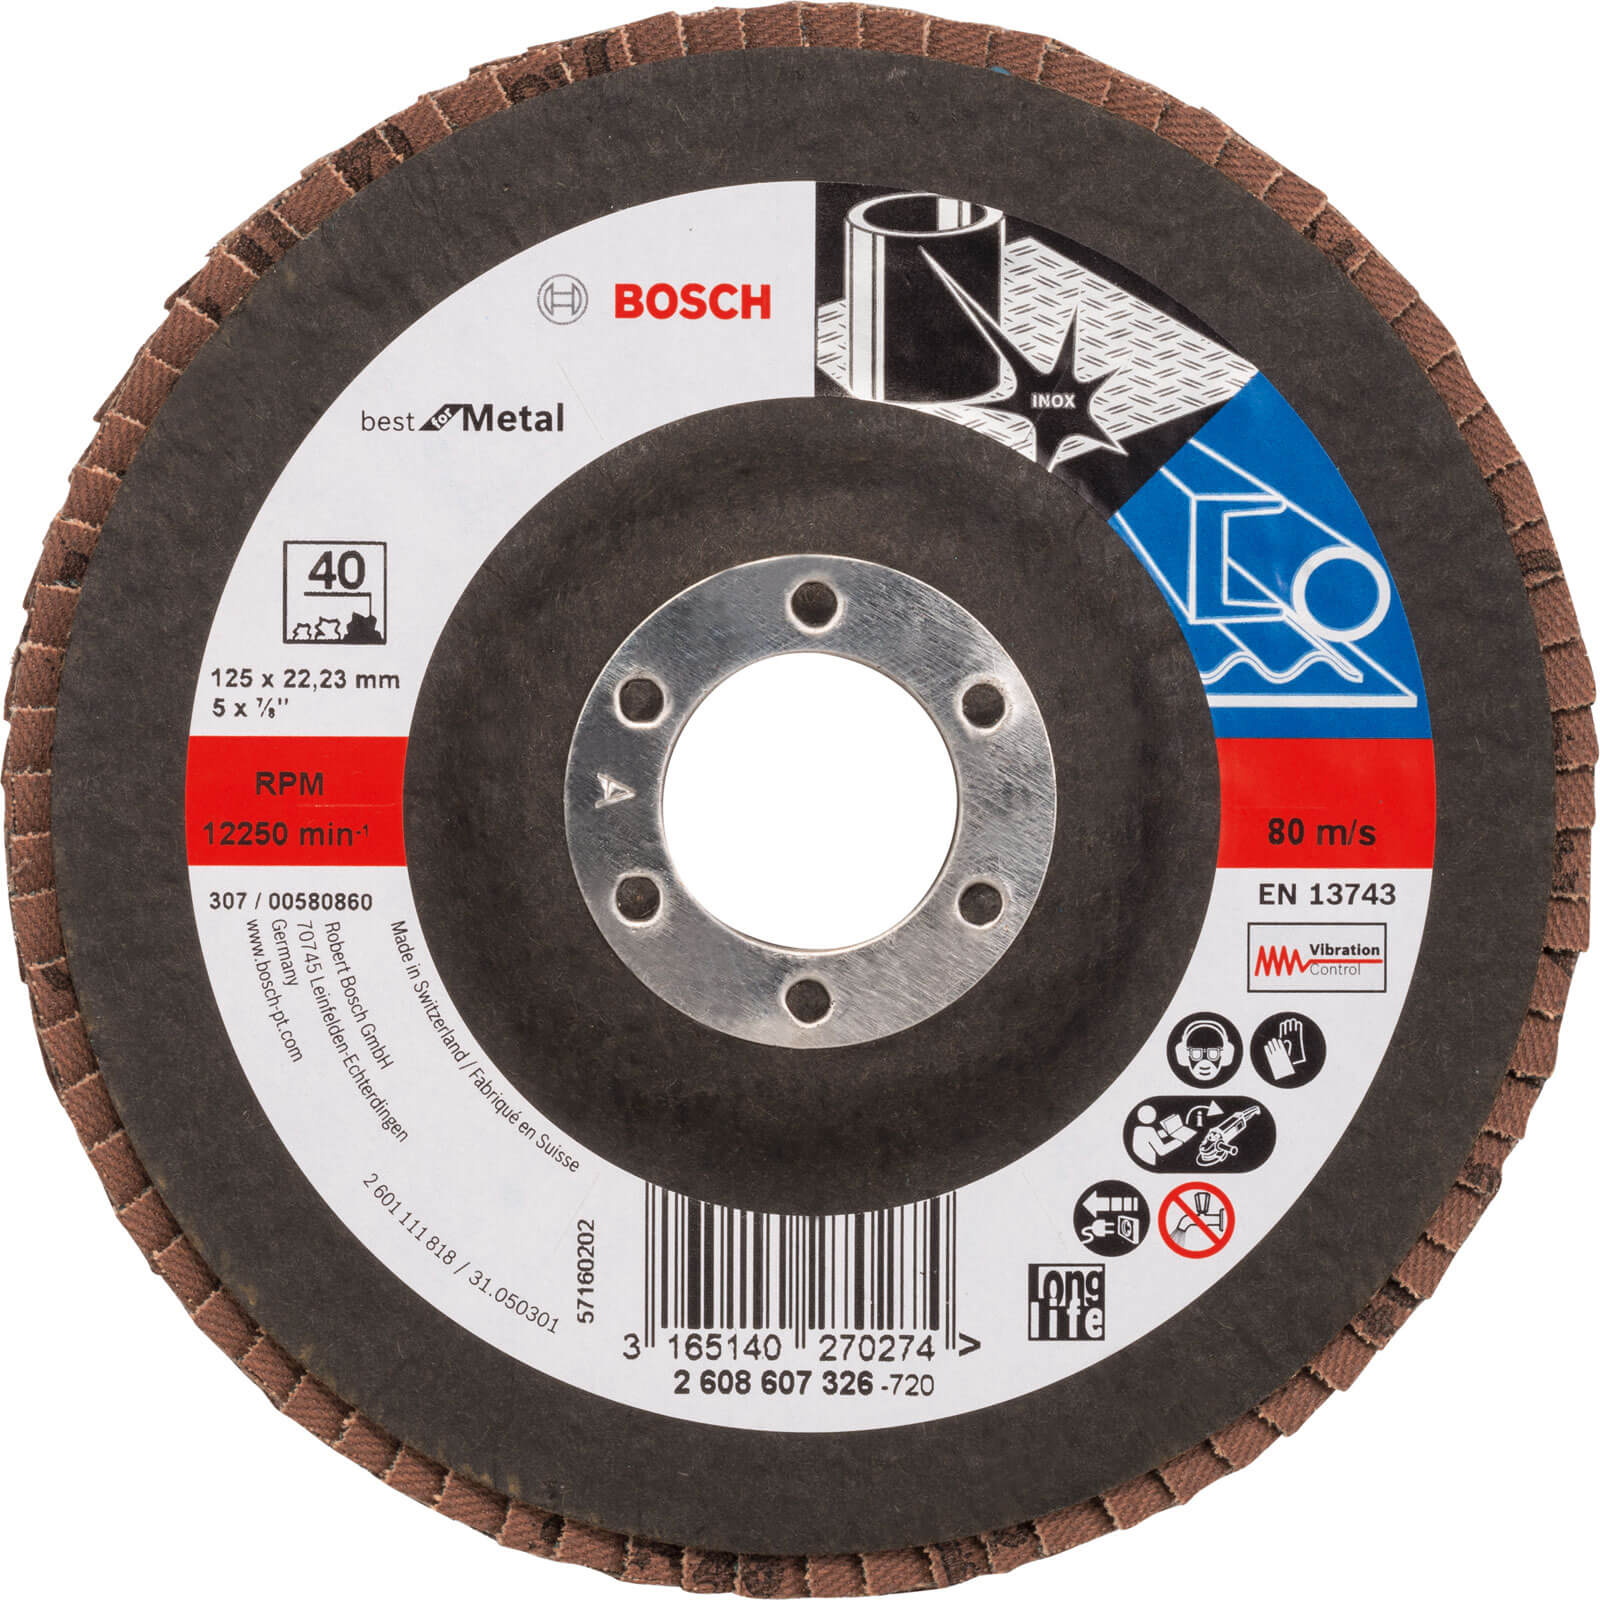 Image of Bosch X571 Best for Metal Straight Flap Disc 125mm 40g Pack of 1